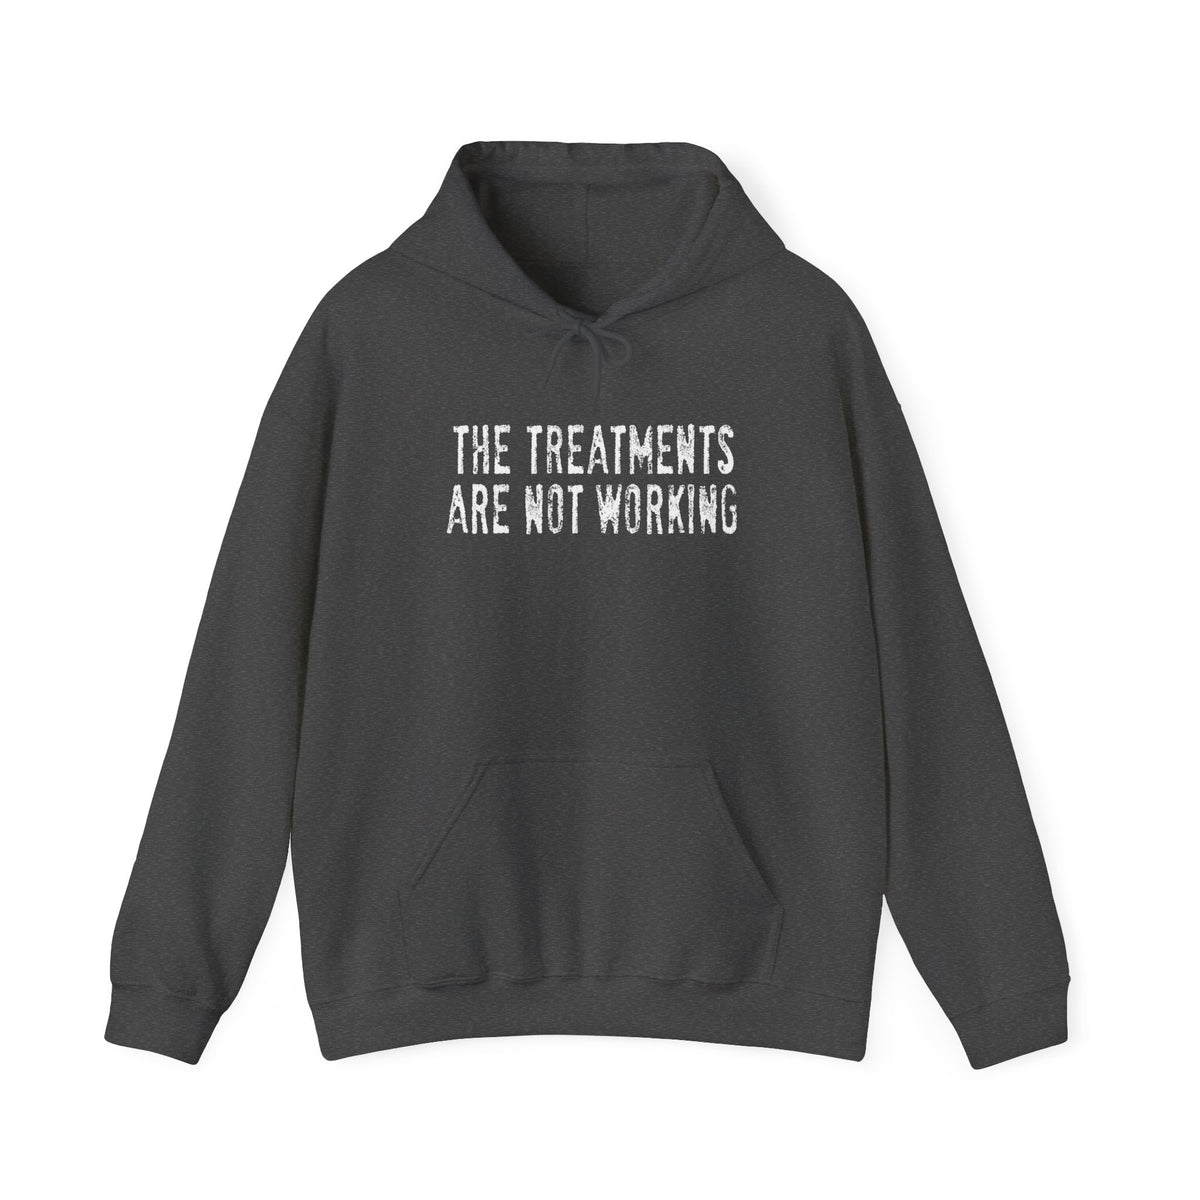 The Treatments Are Not Working - Hoodie